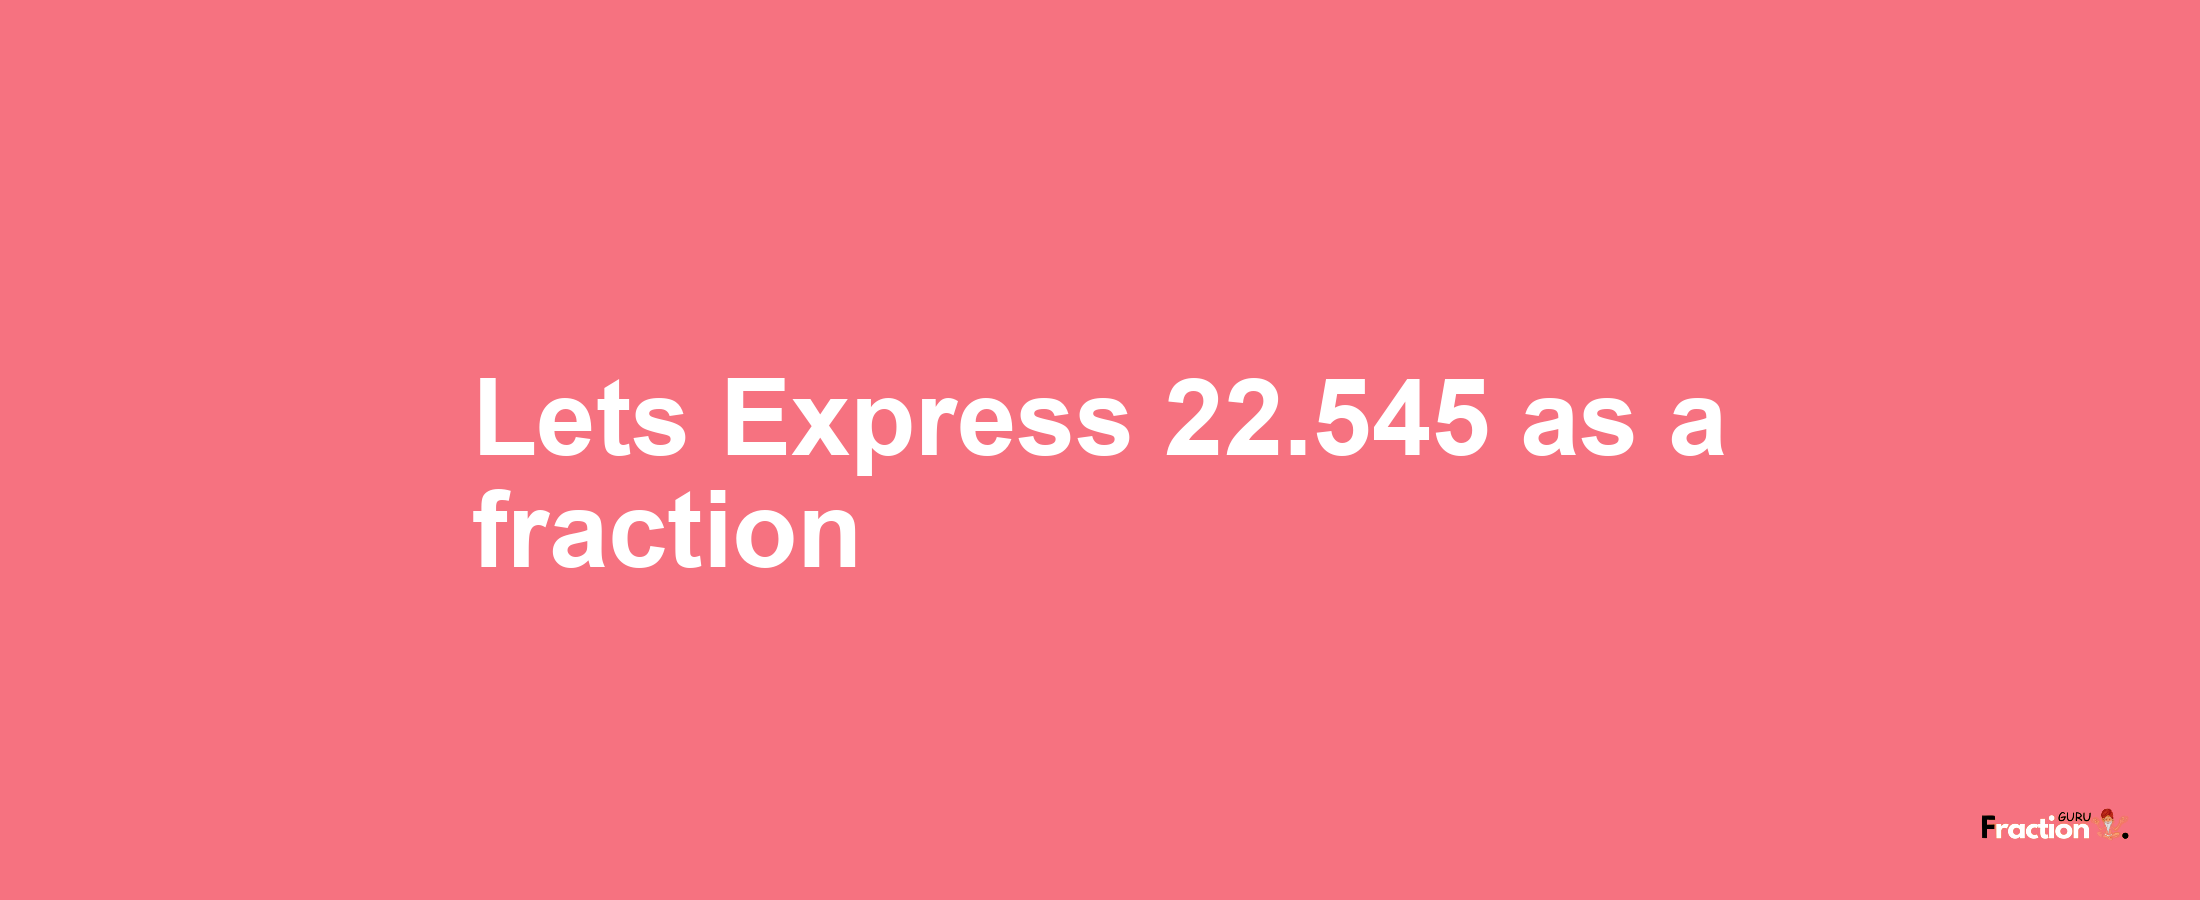 Lets Express 22.545 as afraction